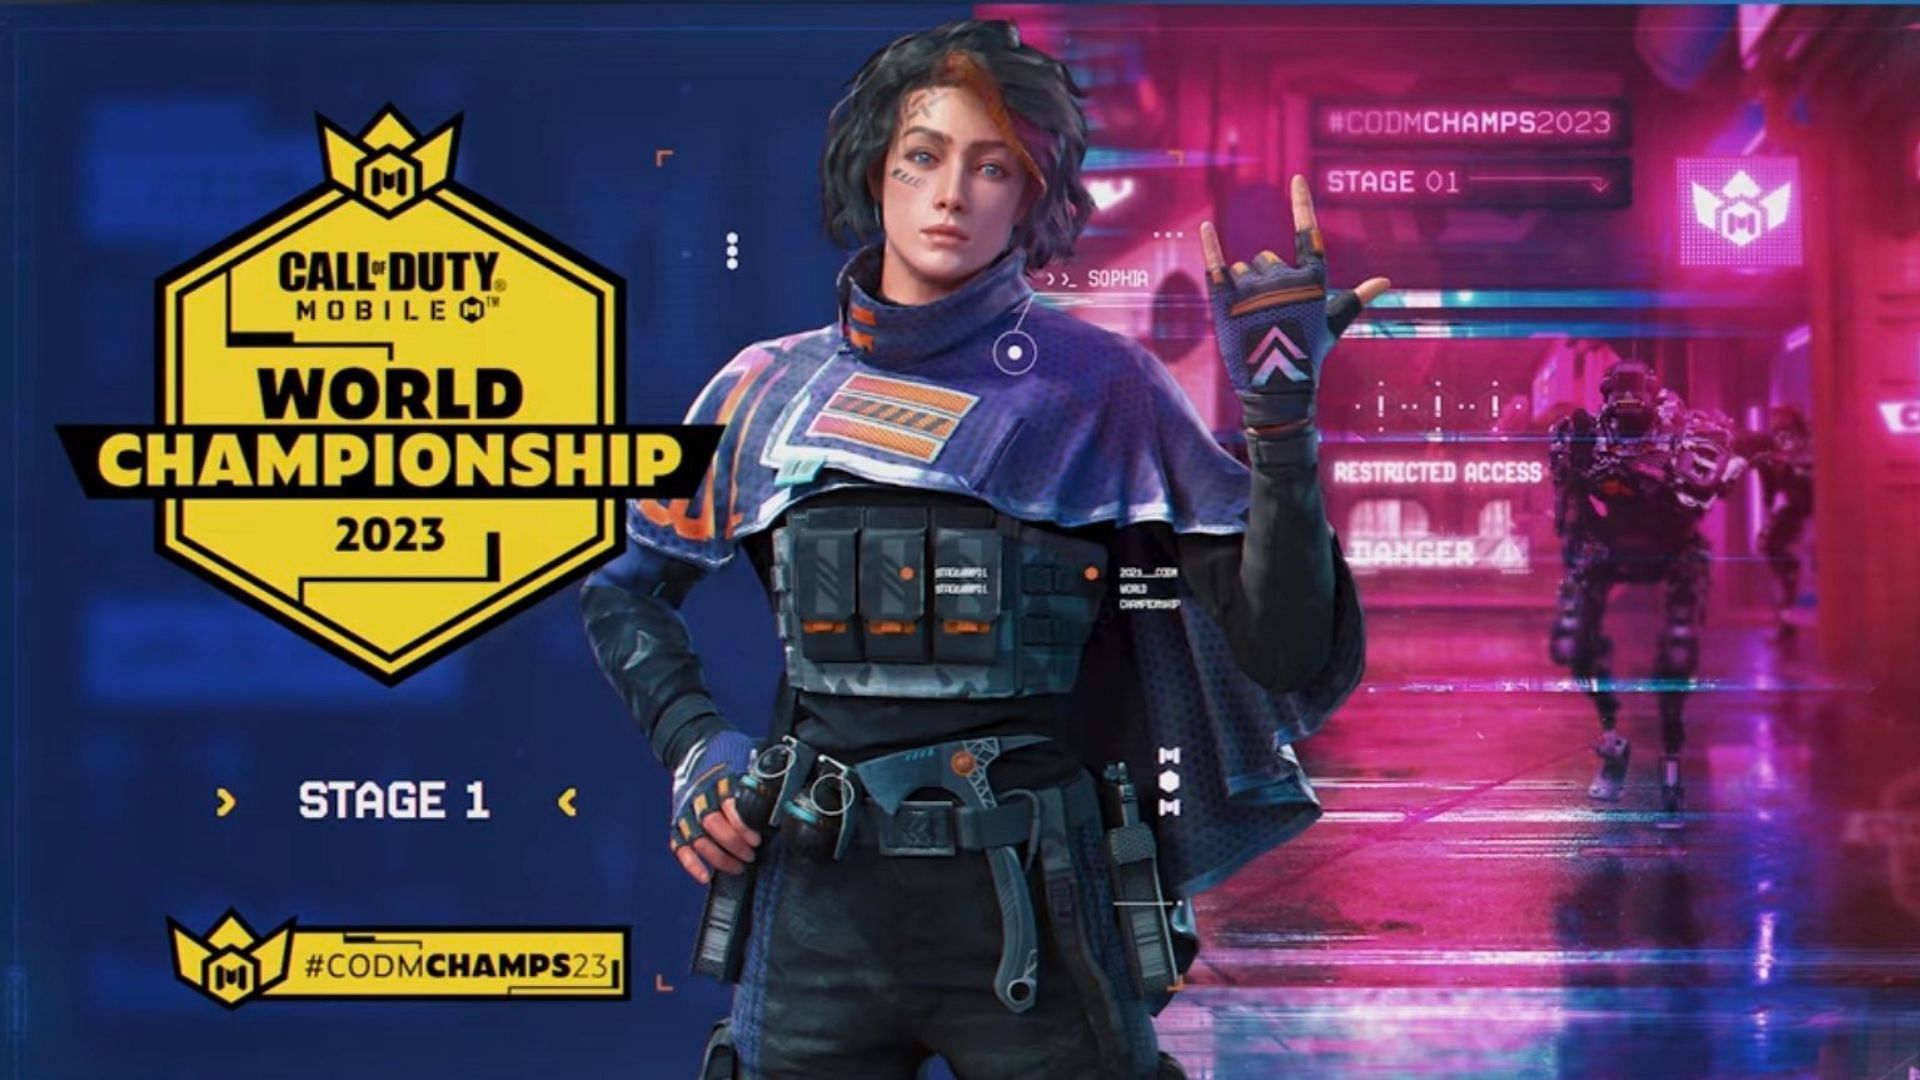 Activision announced the fourth season of COD Mobile World Championship 2023 (Image via Activision)